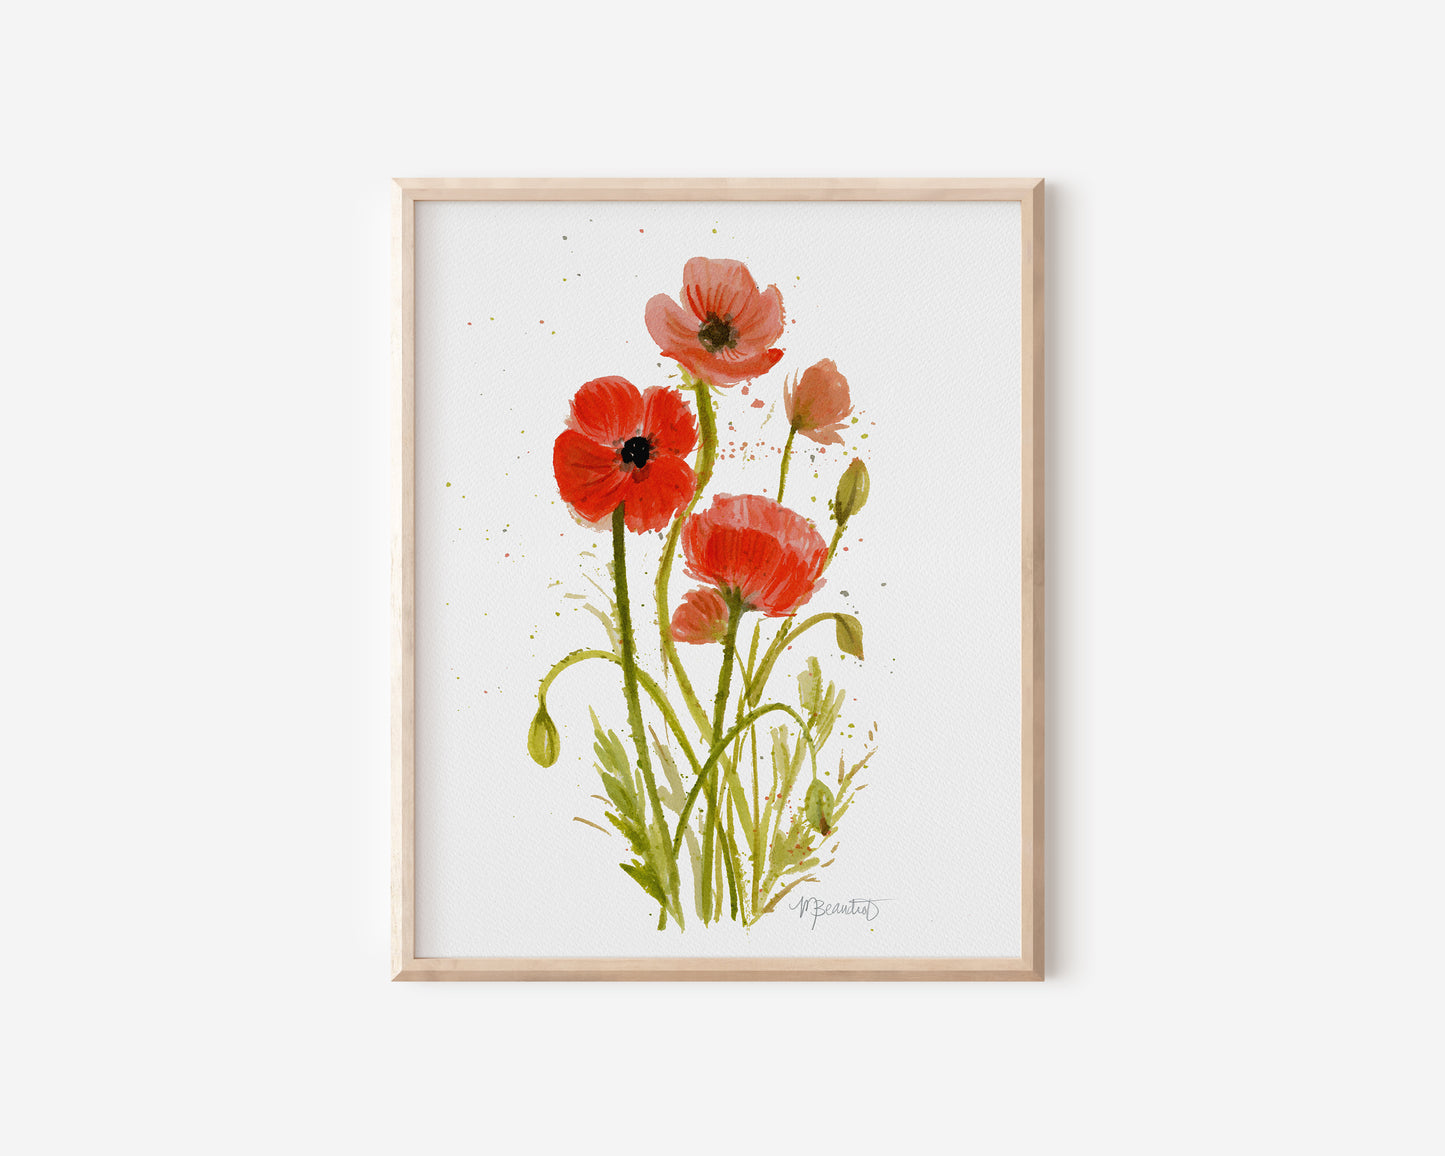 Loose Poppy Bouquet with Dancing Stem No. 1: Set of 2 Prints